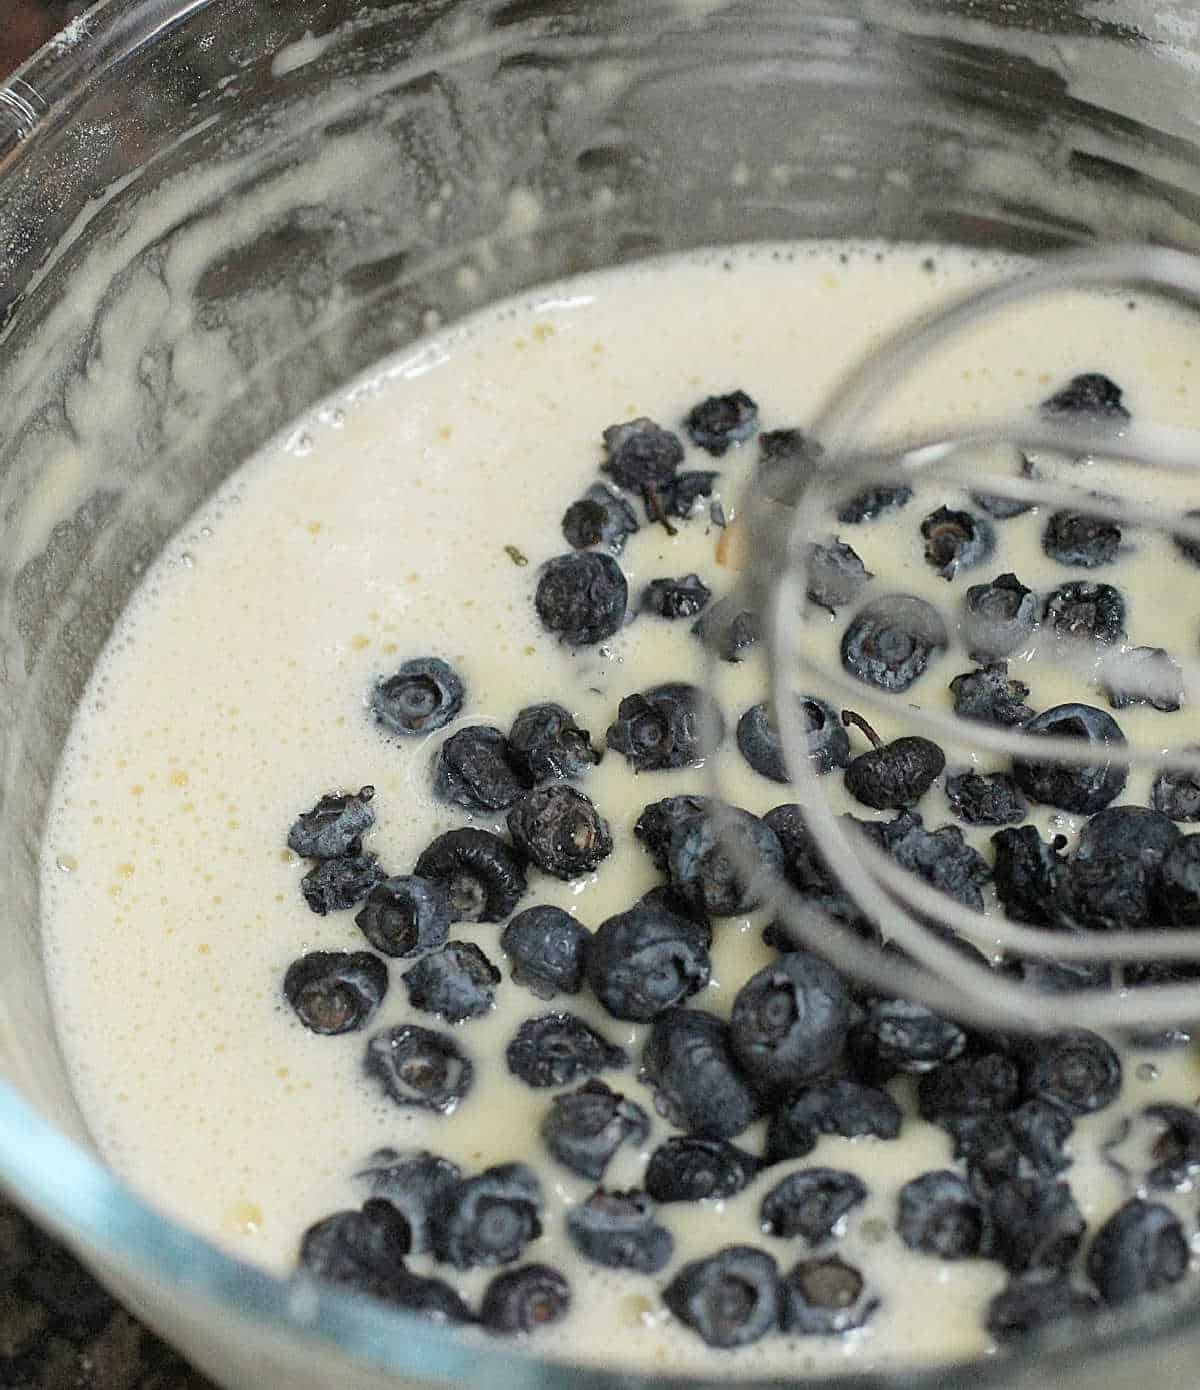 Glass bowl with pancake batter and blueberries and a whisk.